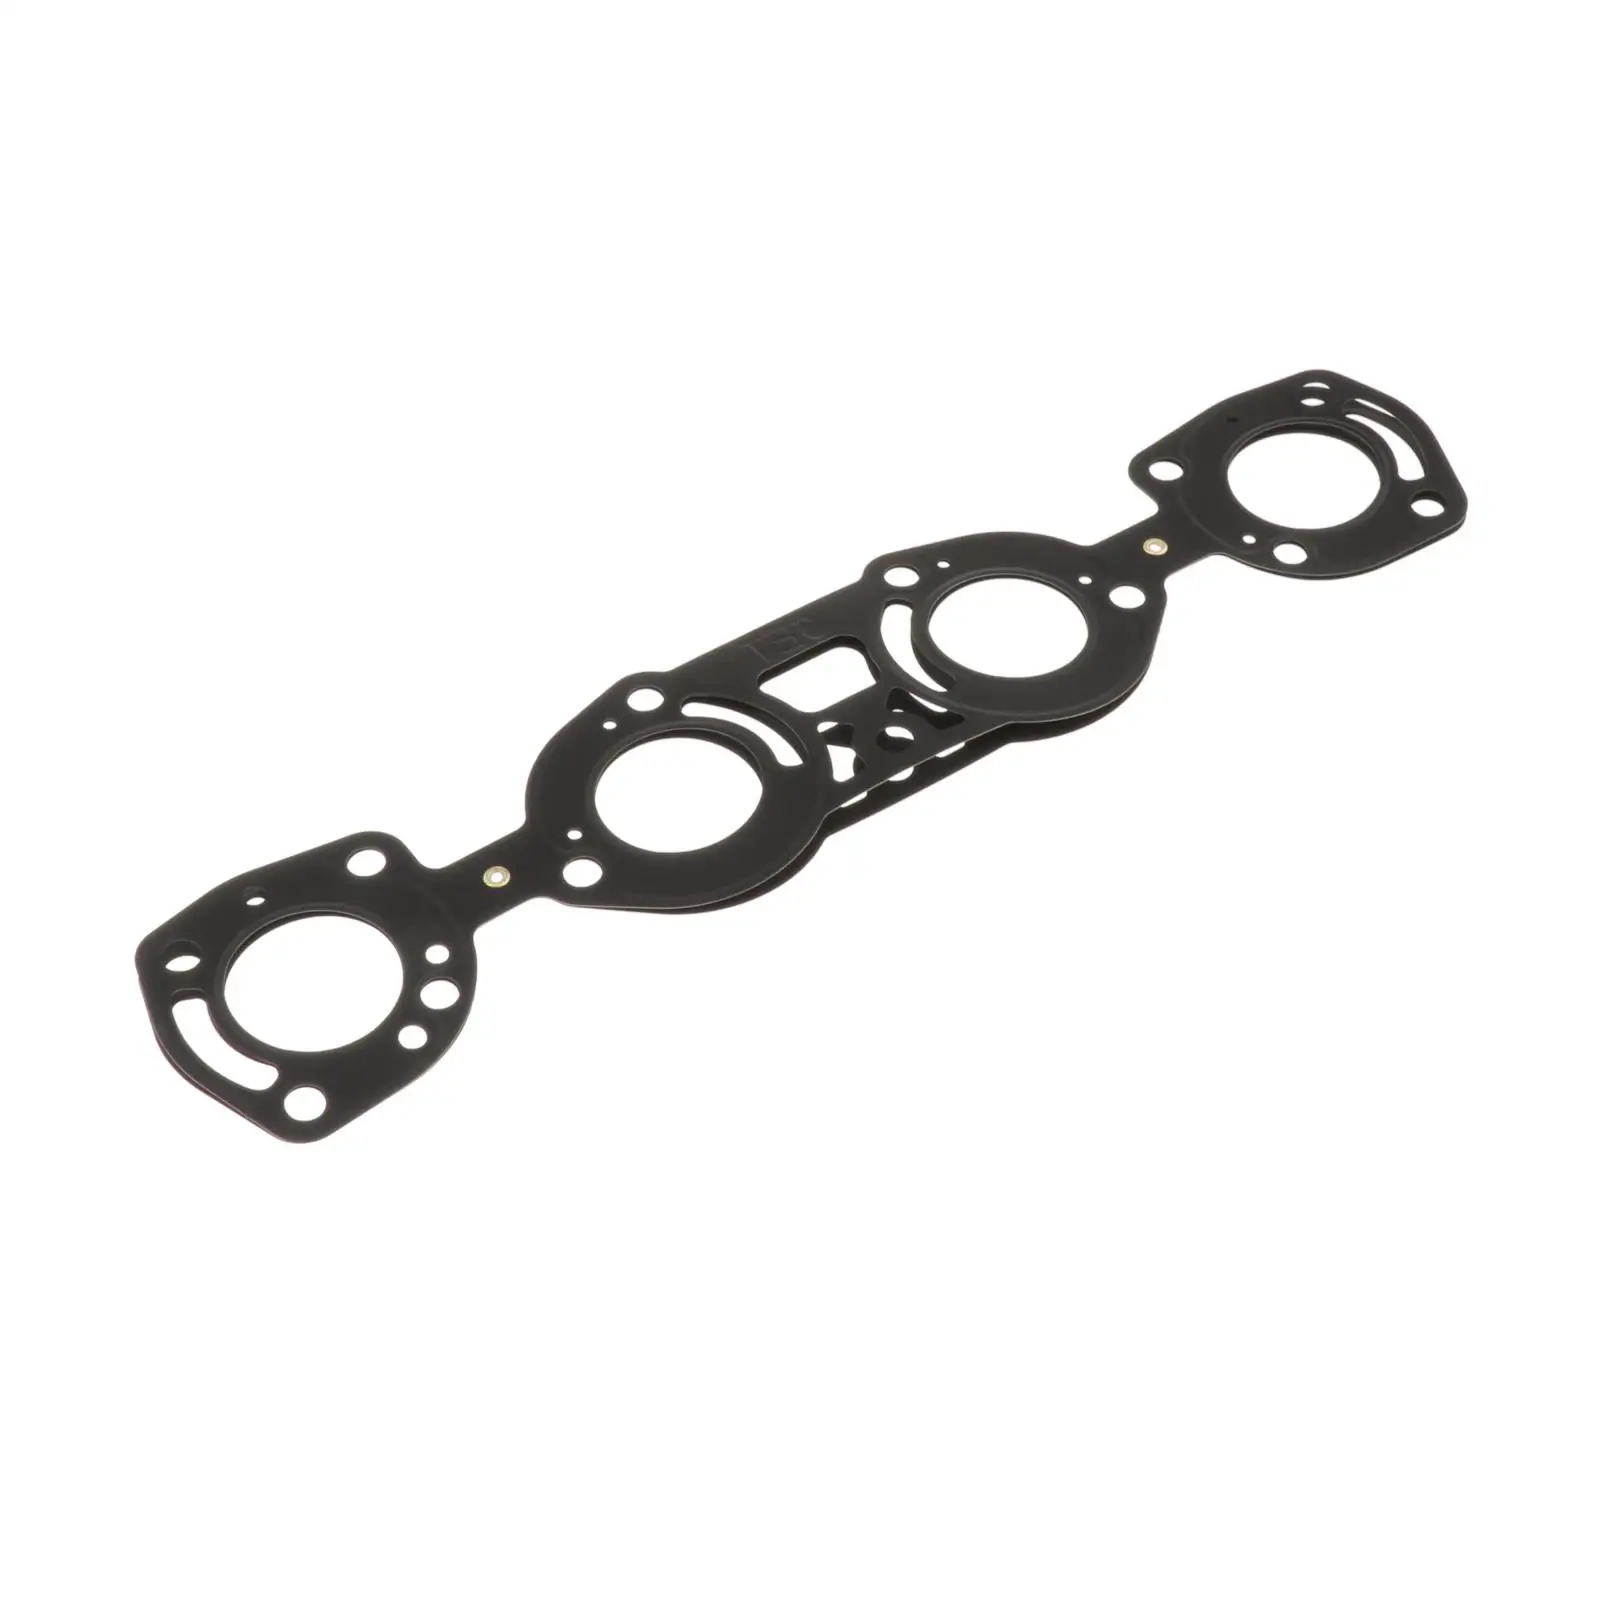 Exhaust Manifold Gasket Fit for Yamaha FZR1800 GP1800 6ET-14613-00-00 Replacement Parts Acc